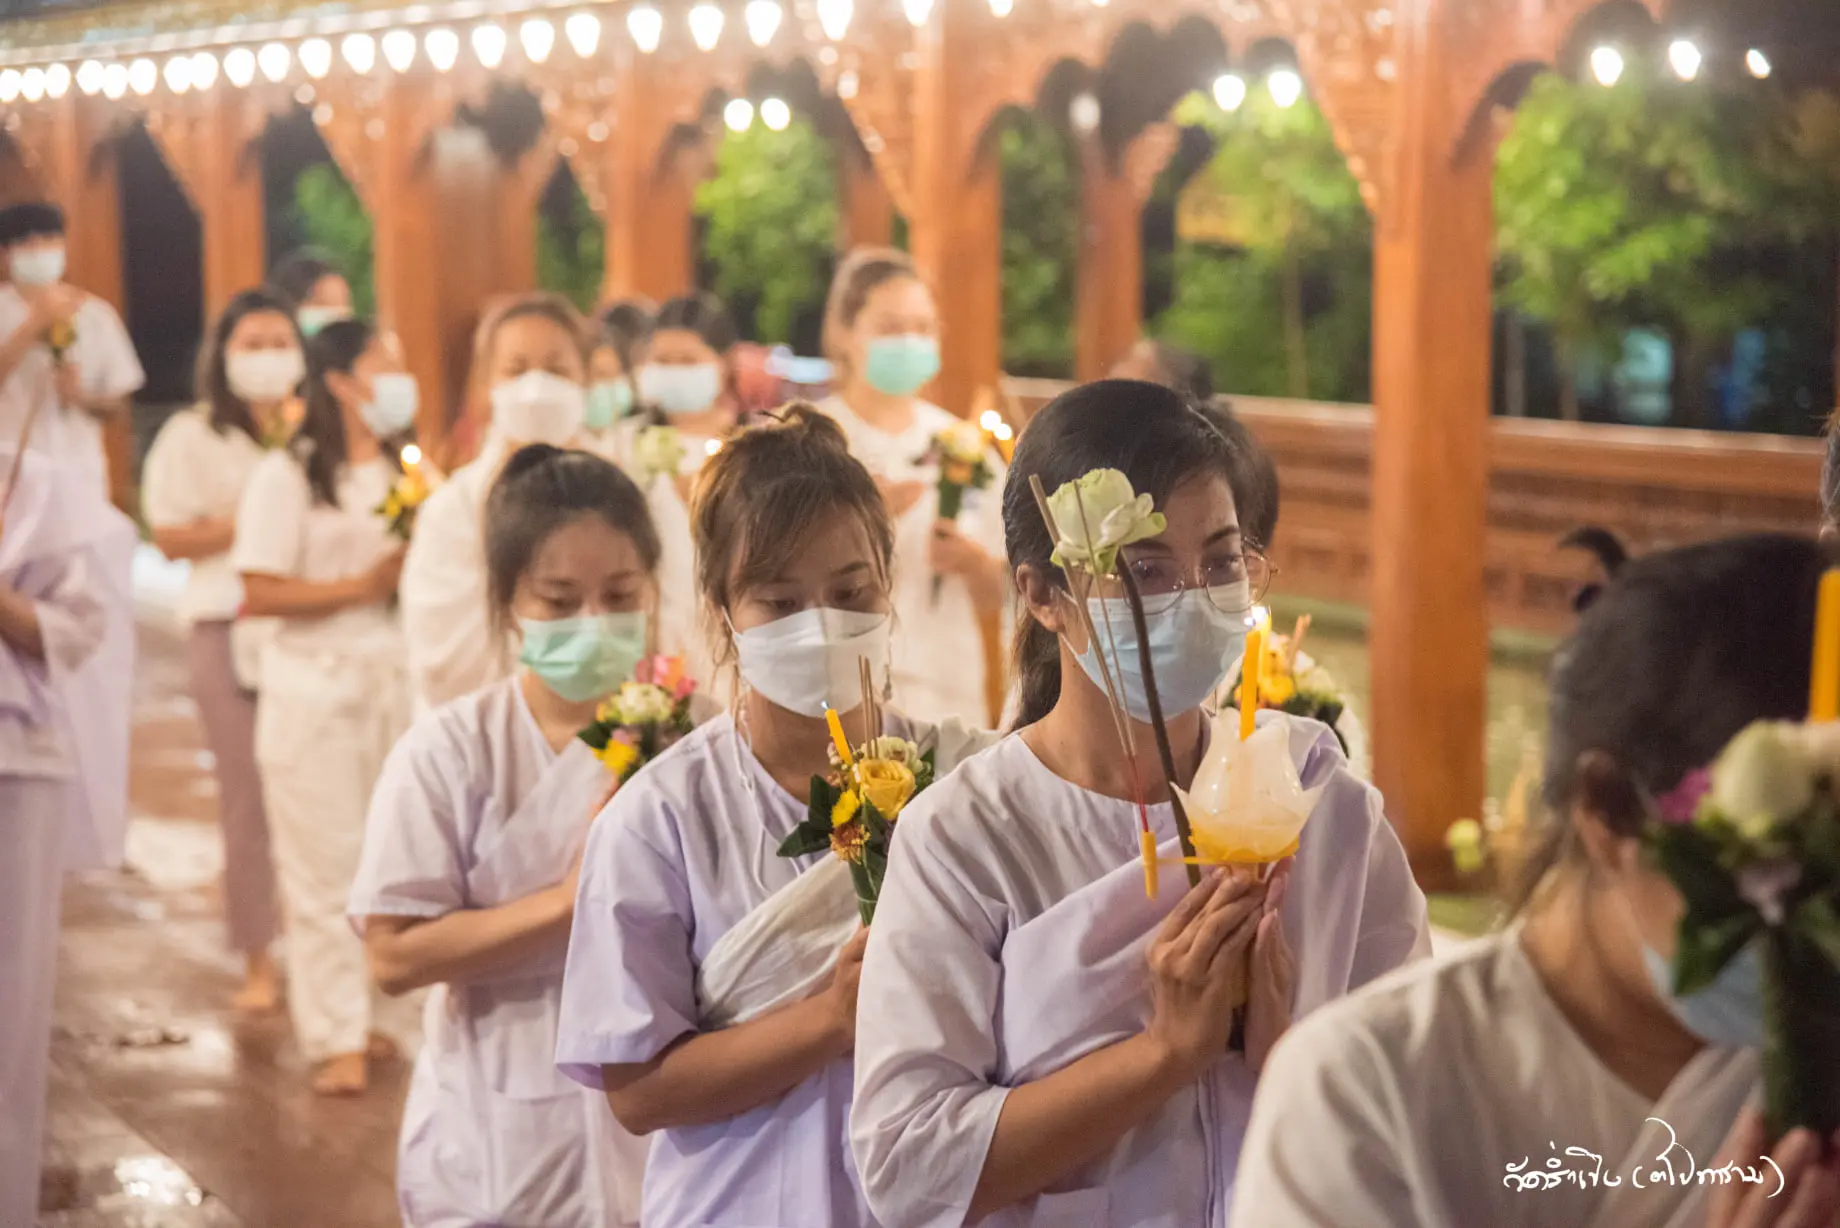 A group of women lined up in queue with prayer hands holding flowers